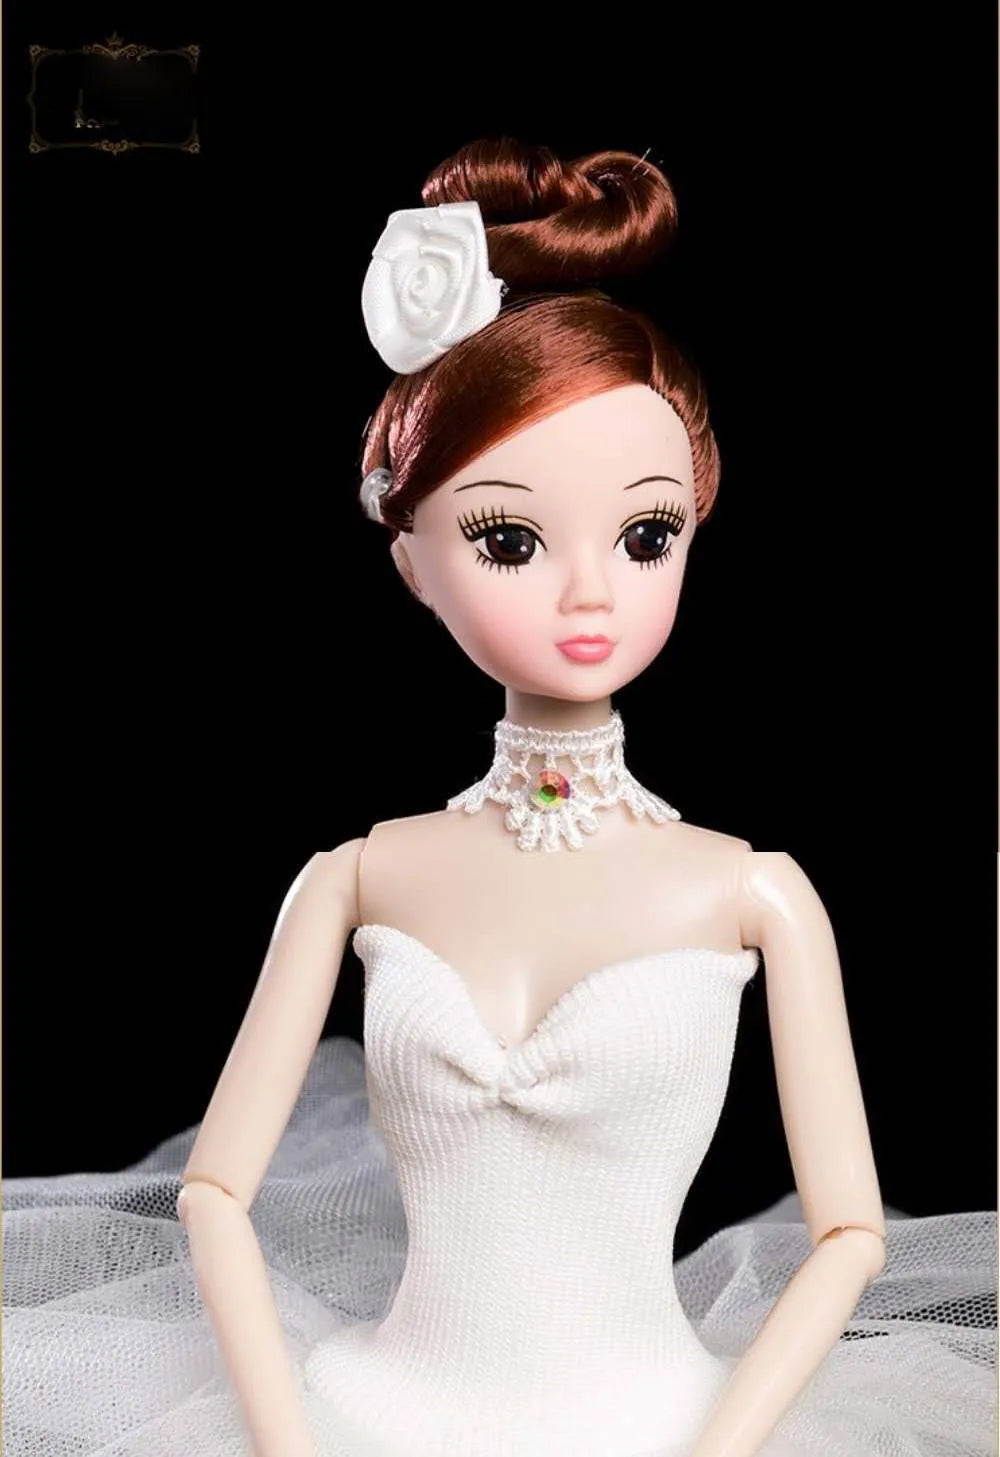 Front of ballerina doll with white tutu